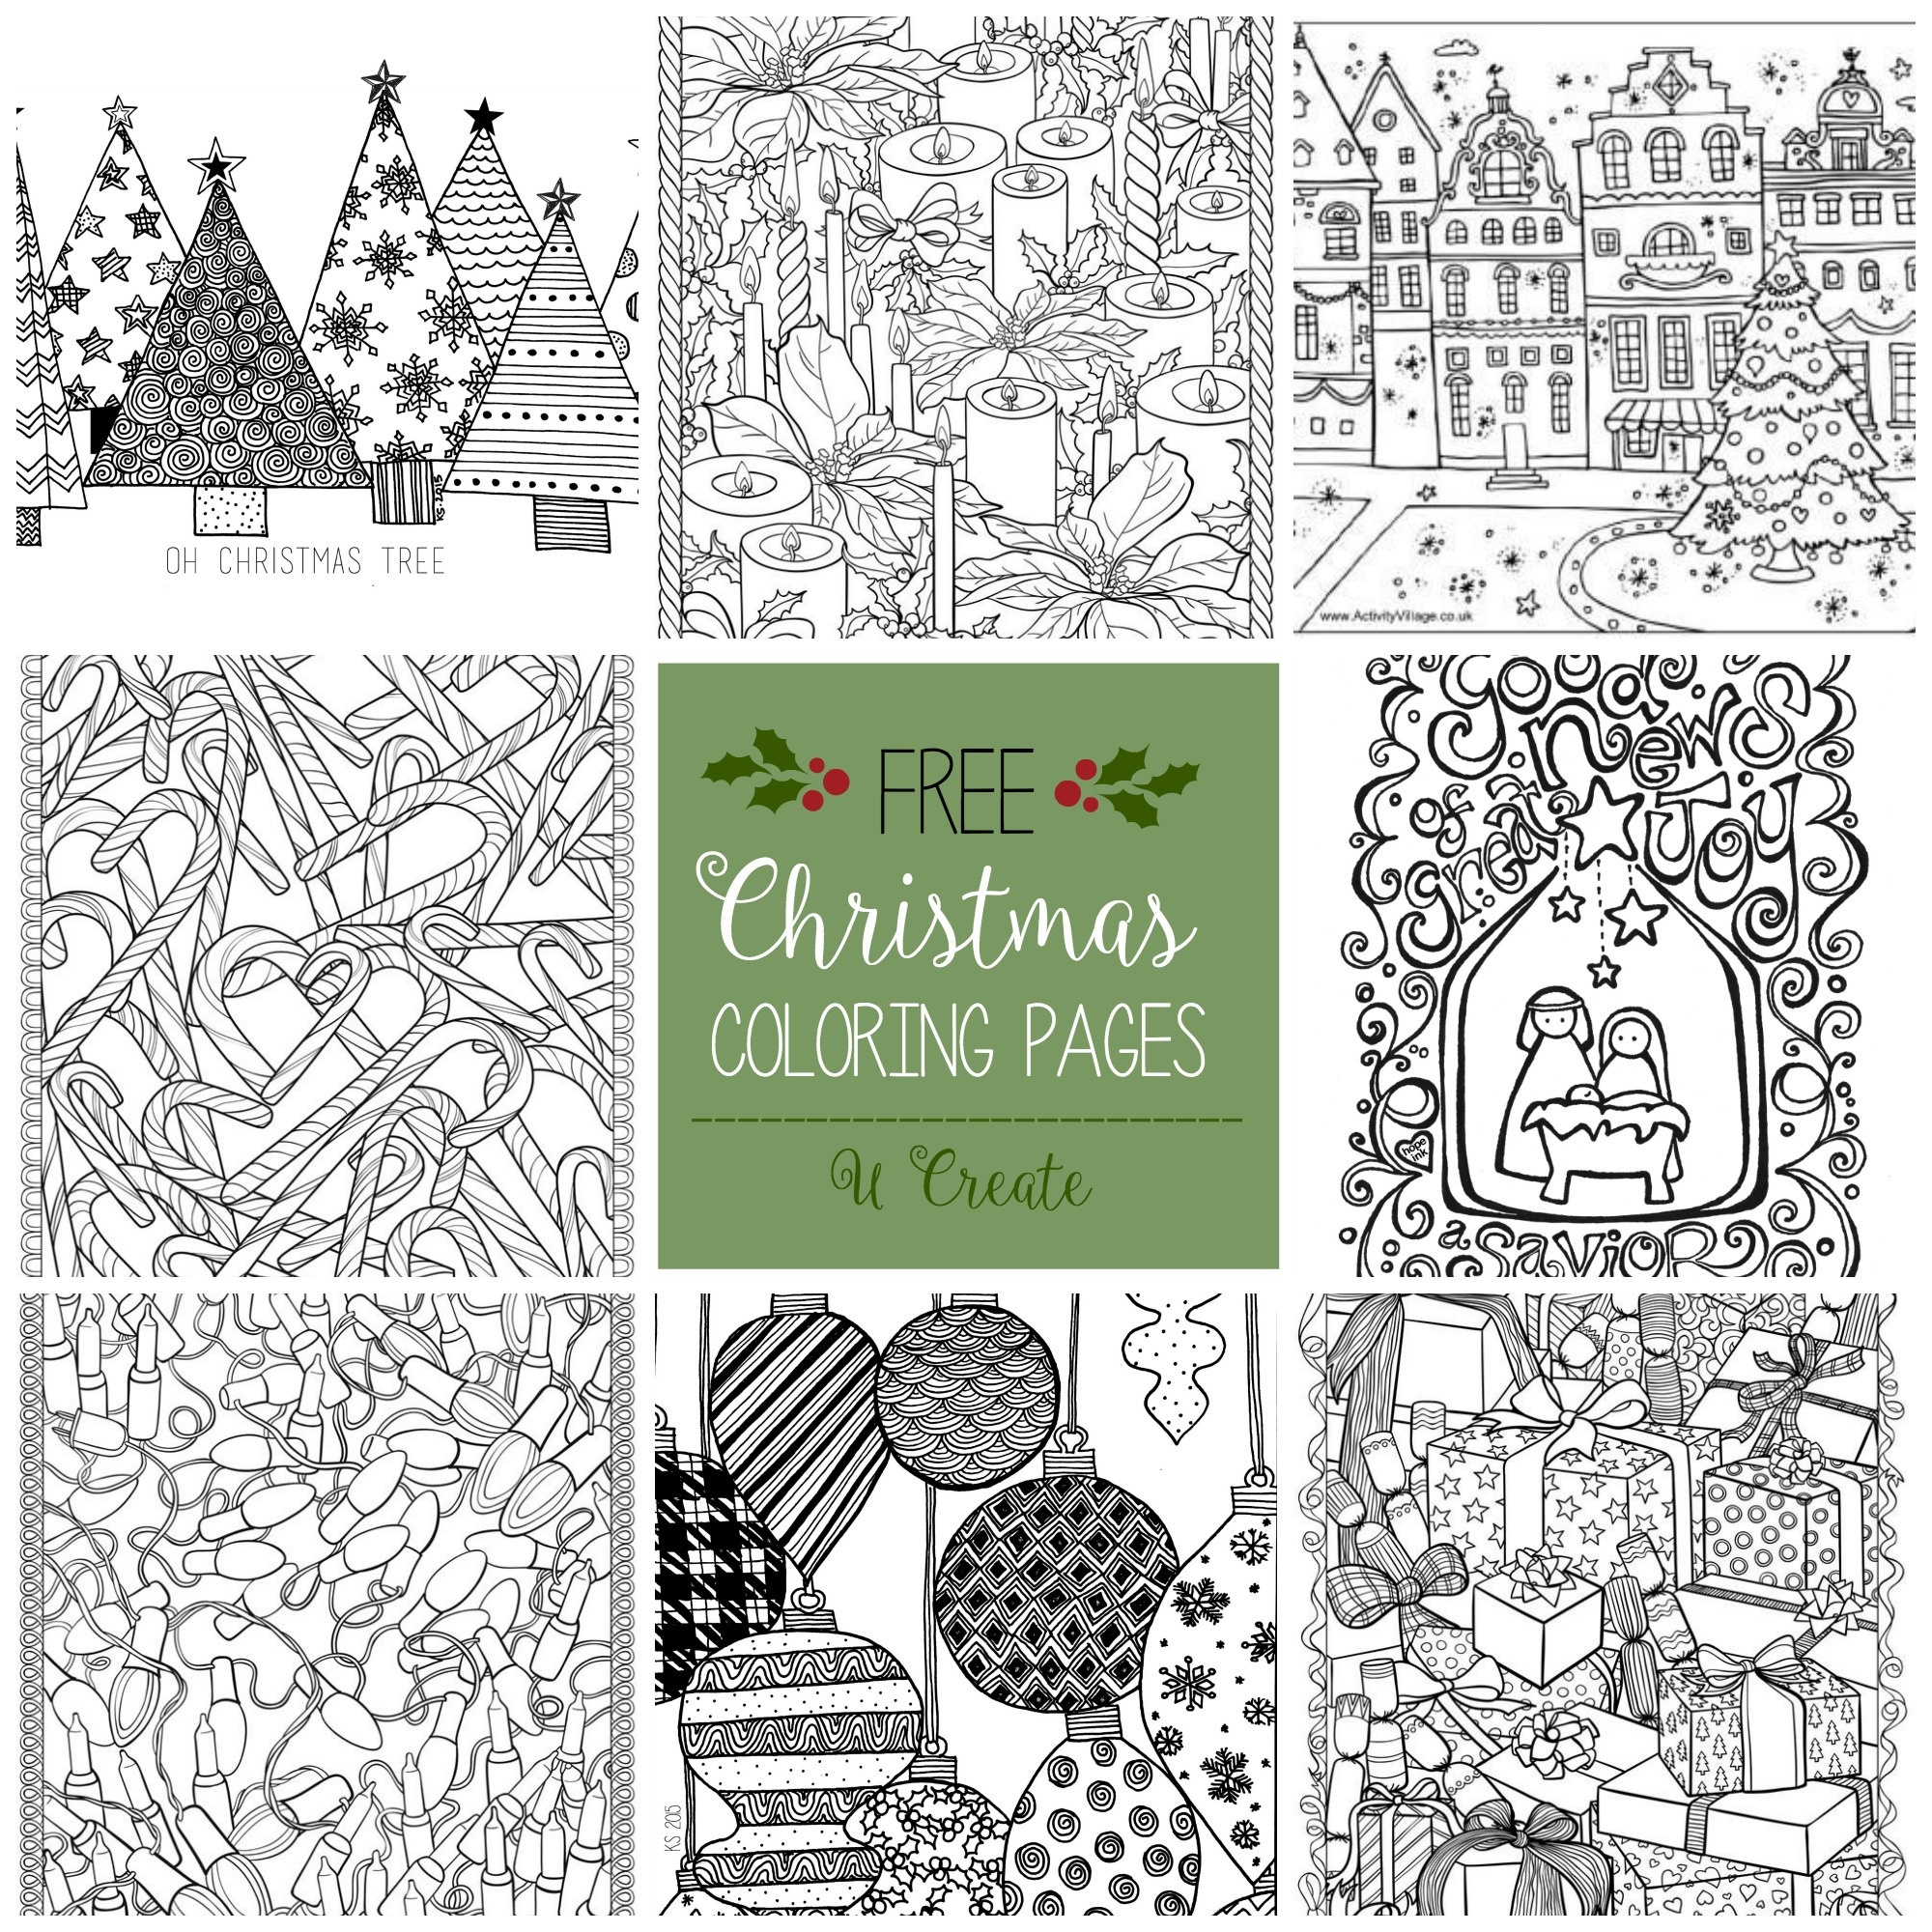 Free Christmas Adult Coloring Pages - U Create - Free Printable Christmas Coloring Pages